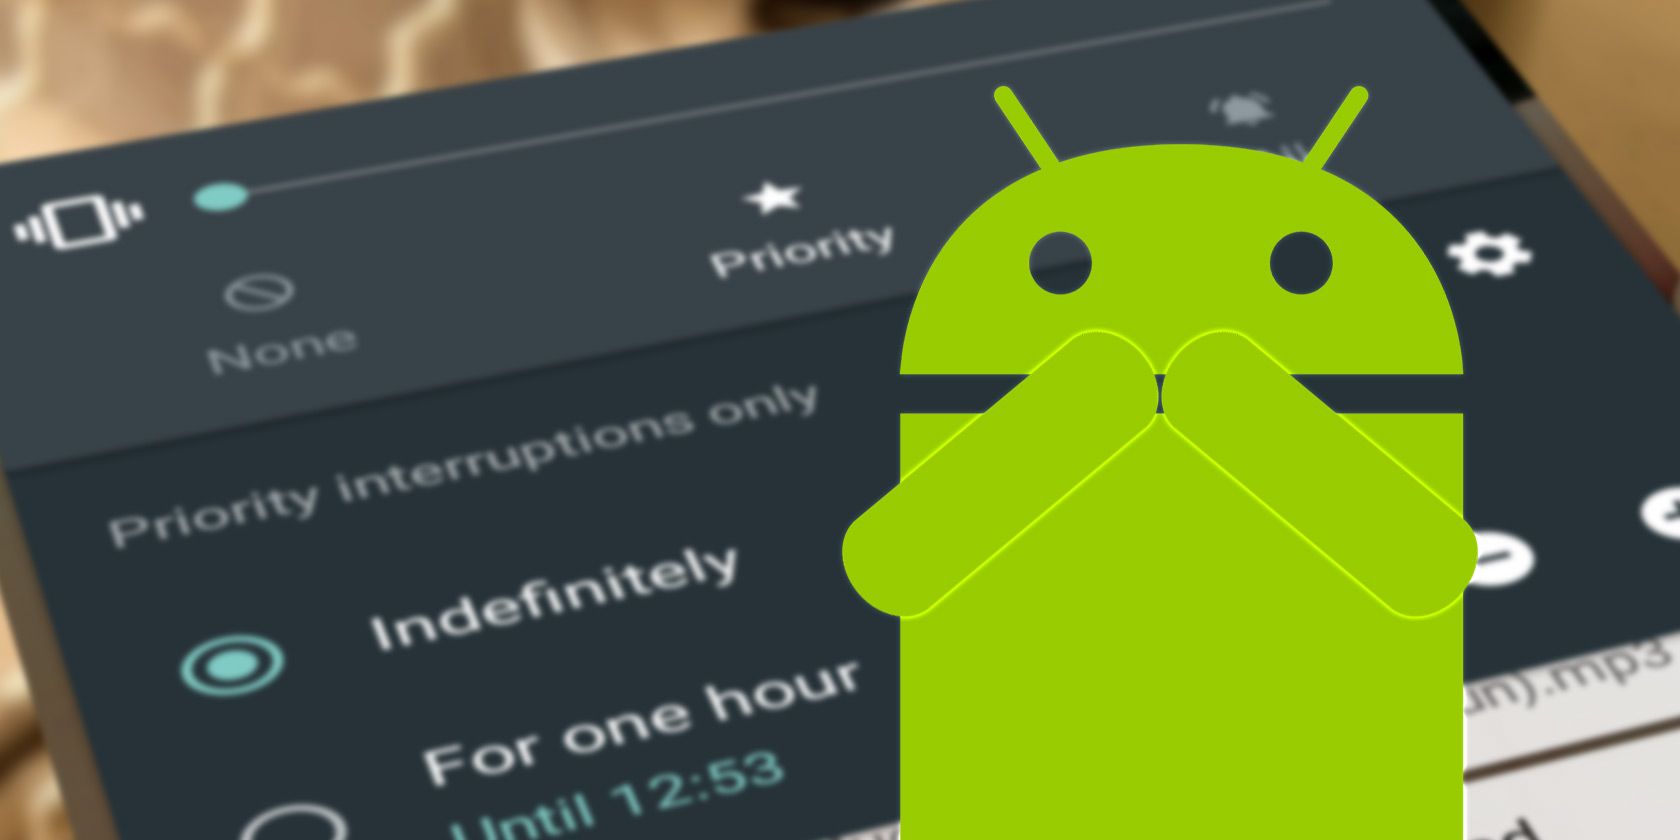 android-priority-mode